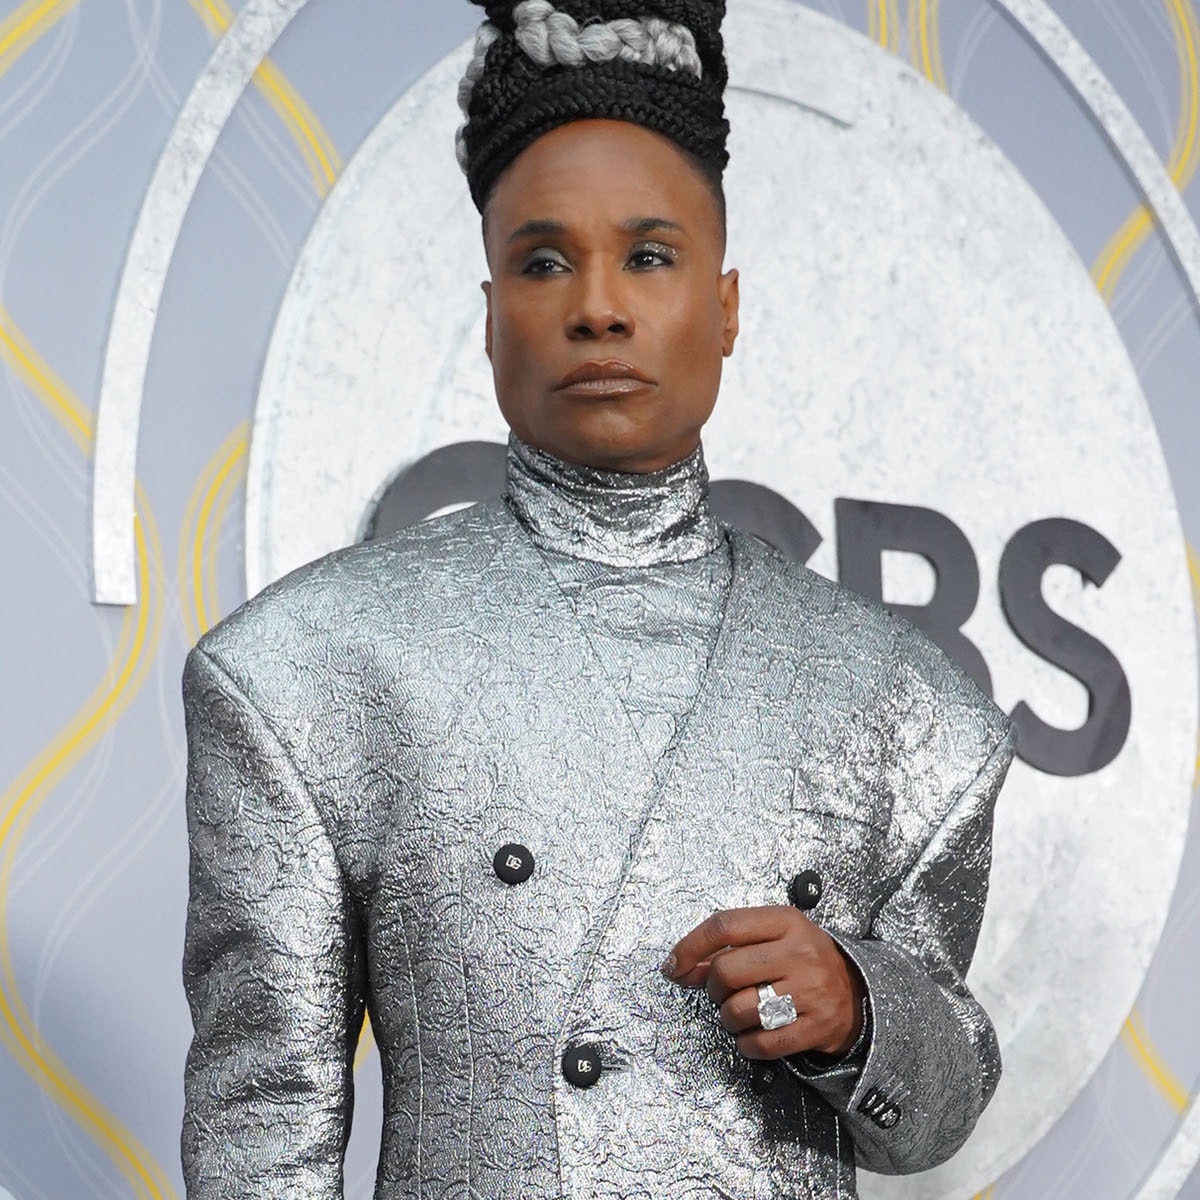 Why Billy Porter Calls His Queerness His "Superpower" TrendRadars